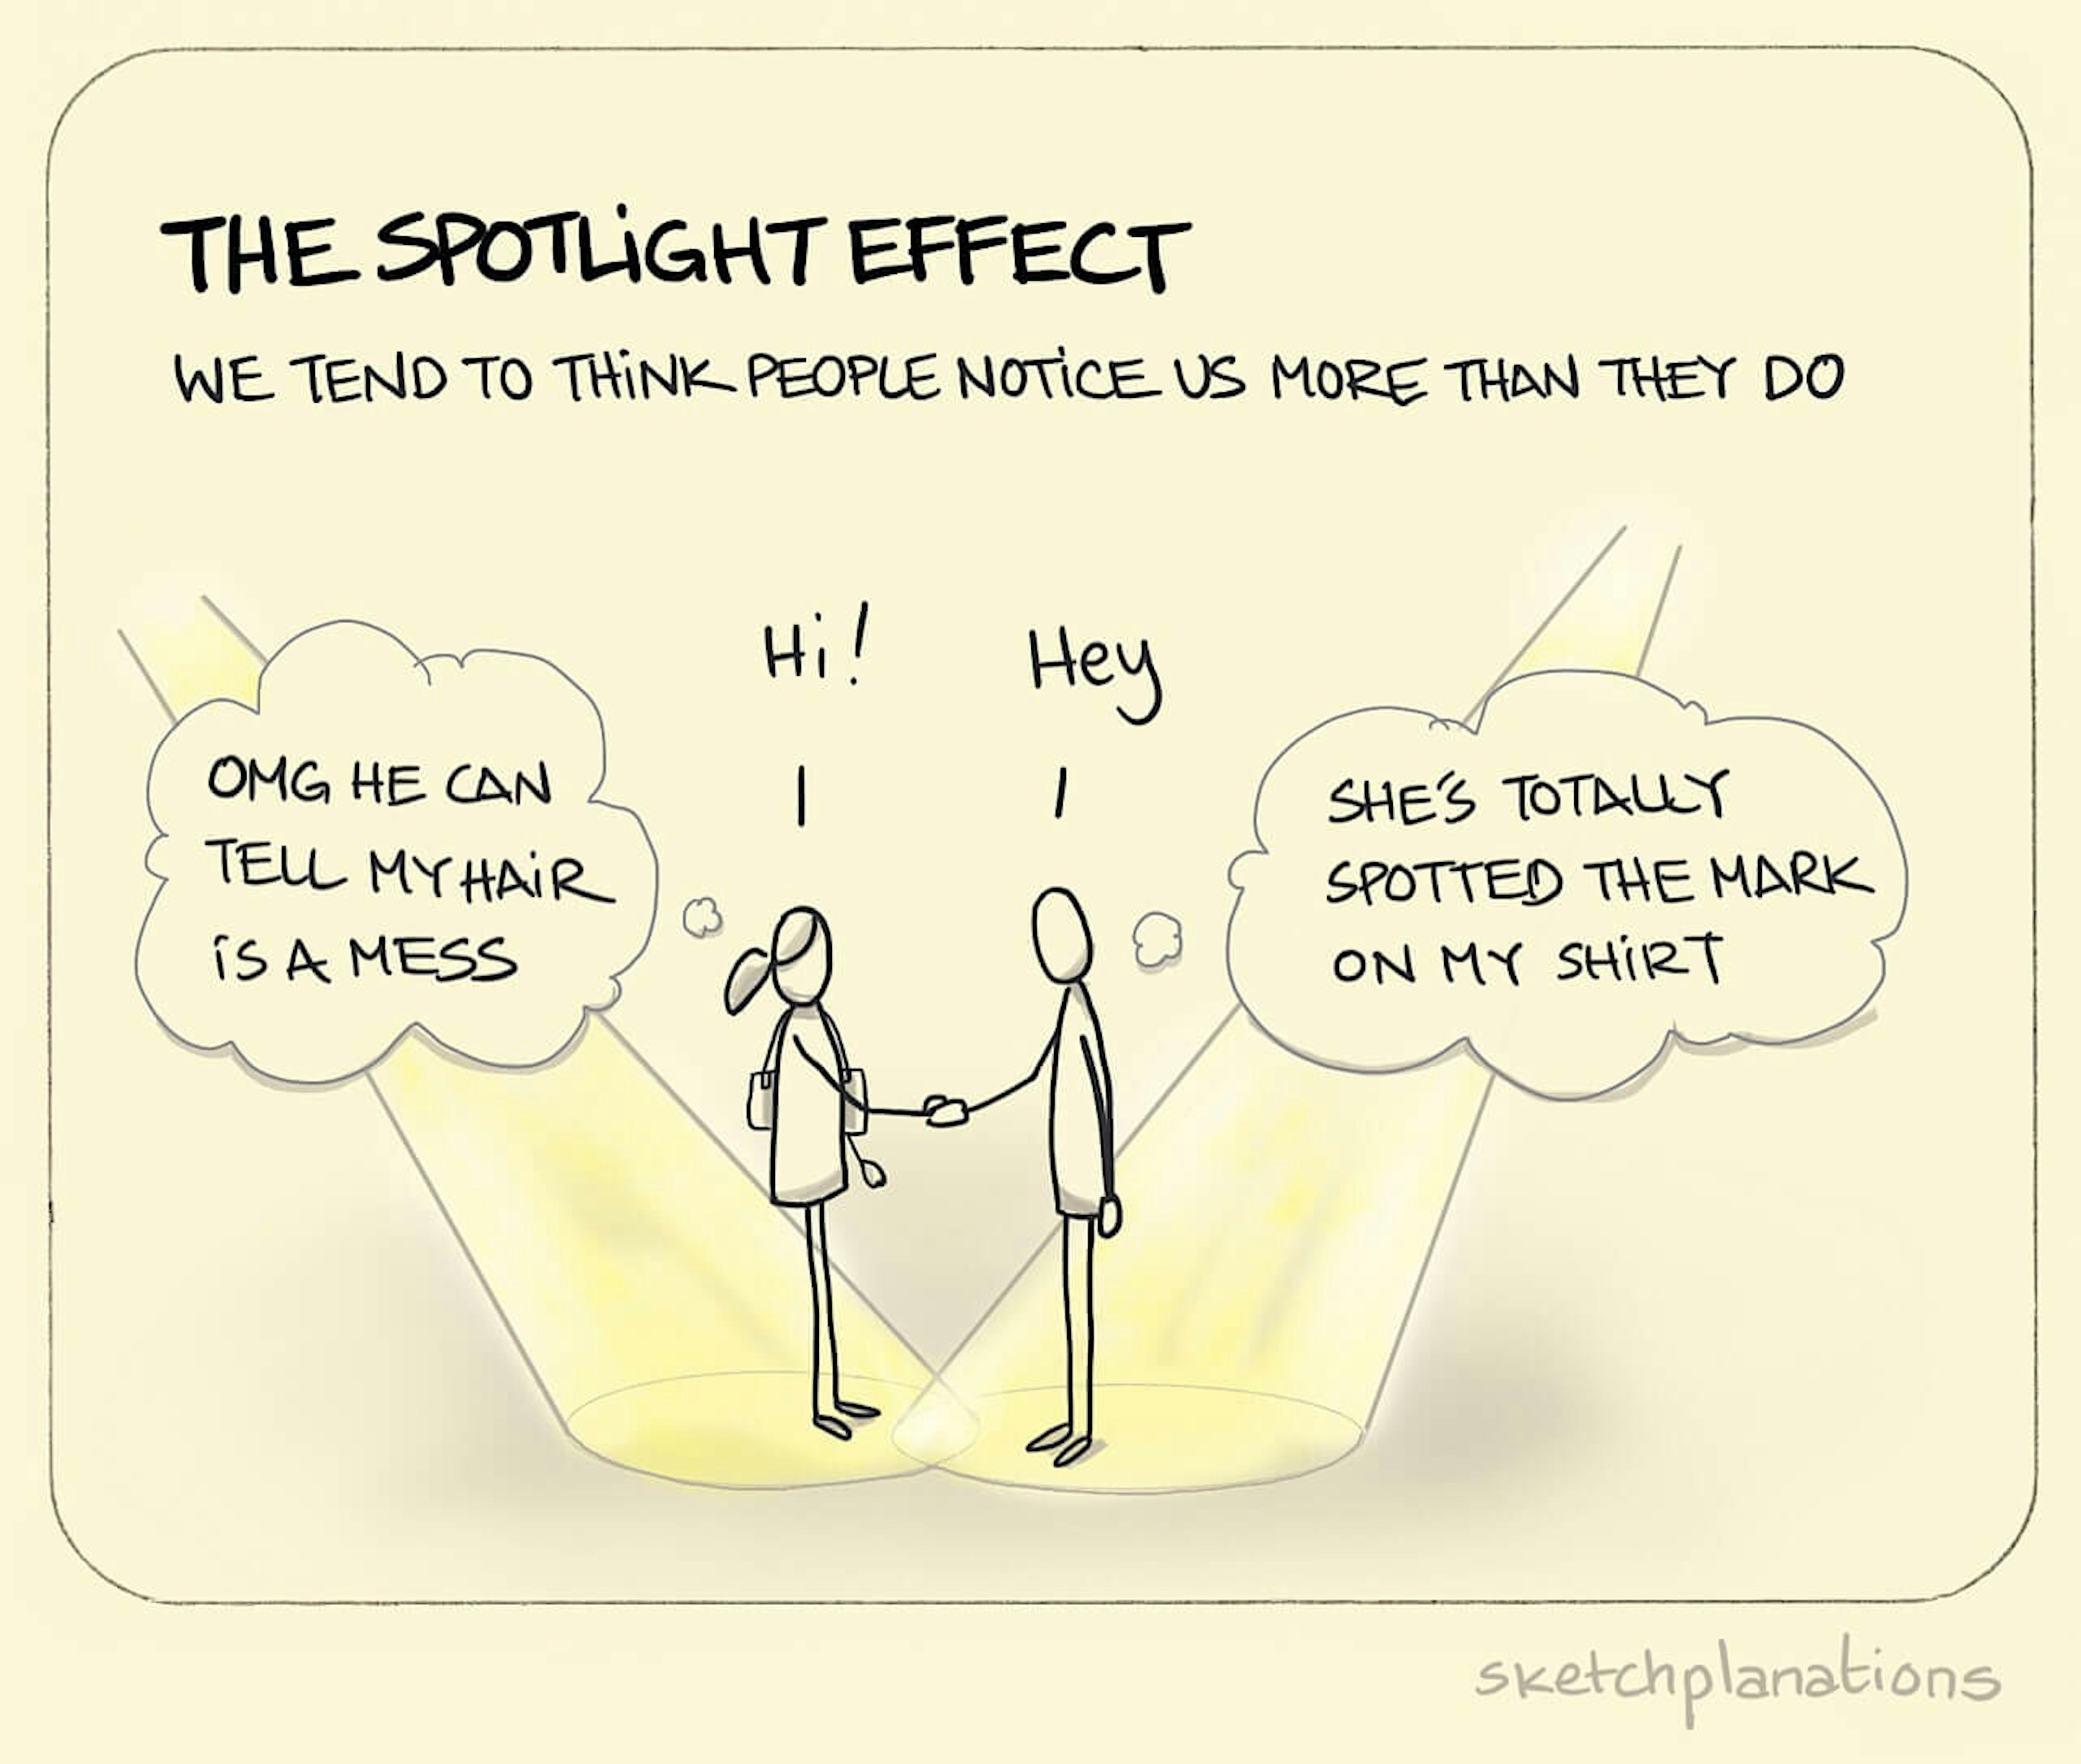 The Spotlight Effect illustration: two individuals greet one another, each illuminated by an intense spotlight as if on stage - and each secretly worry about how the other perceives their appearance.